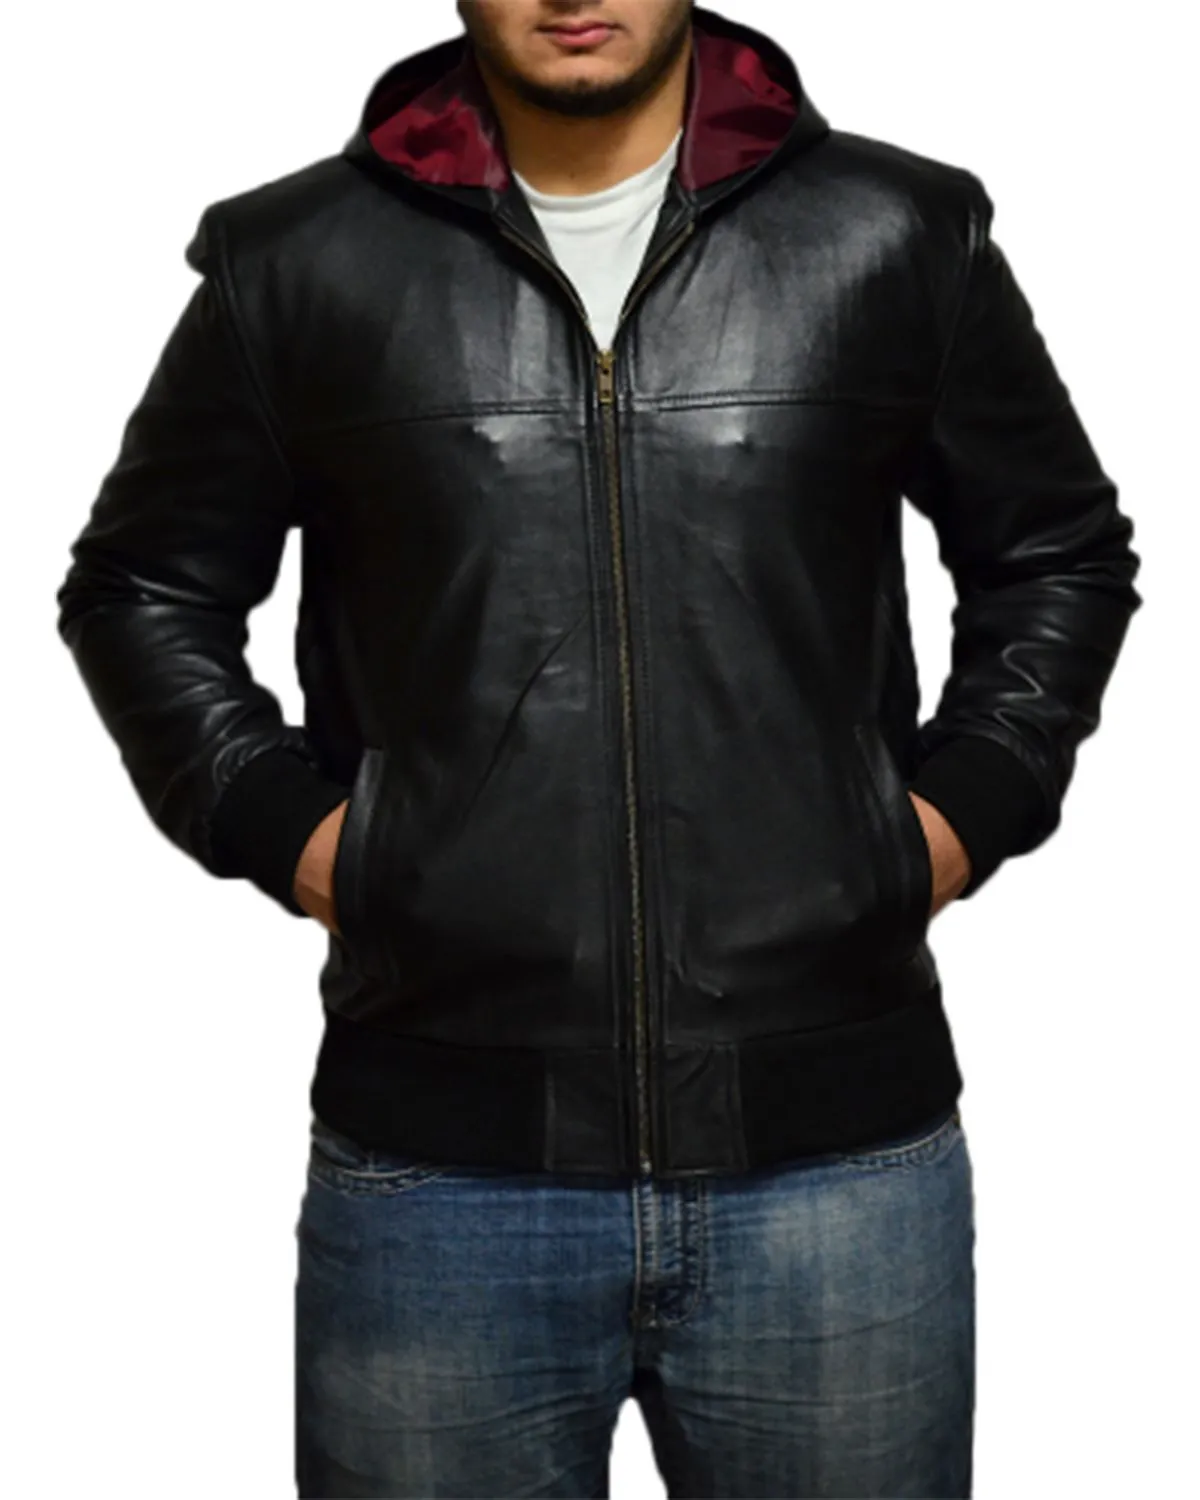 Mens All Black Bomber Leather Jacket With Hood